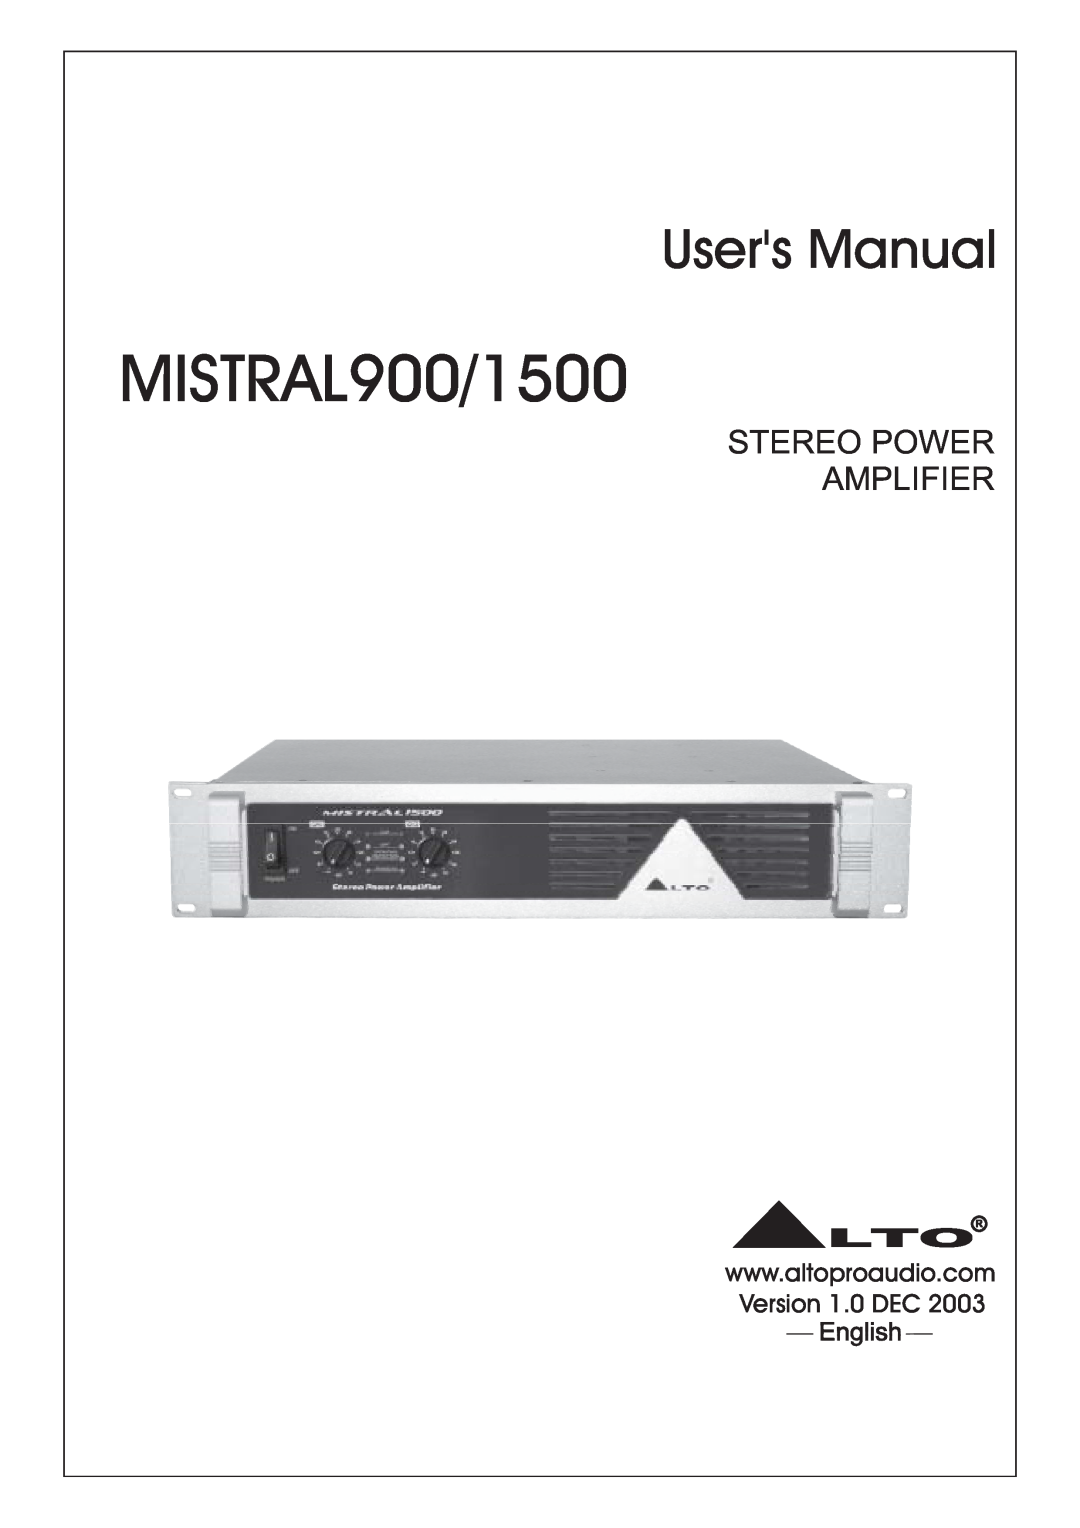 Mistral user manual MISTRAL900/1500, Users Manual, Stereo Power Amplifier, Version 1.0 DEC, English 